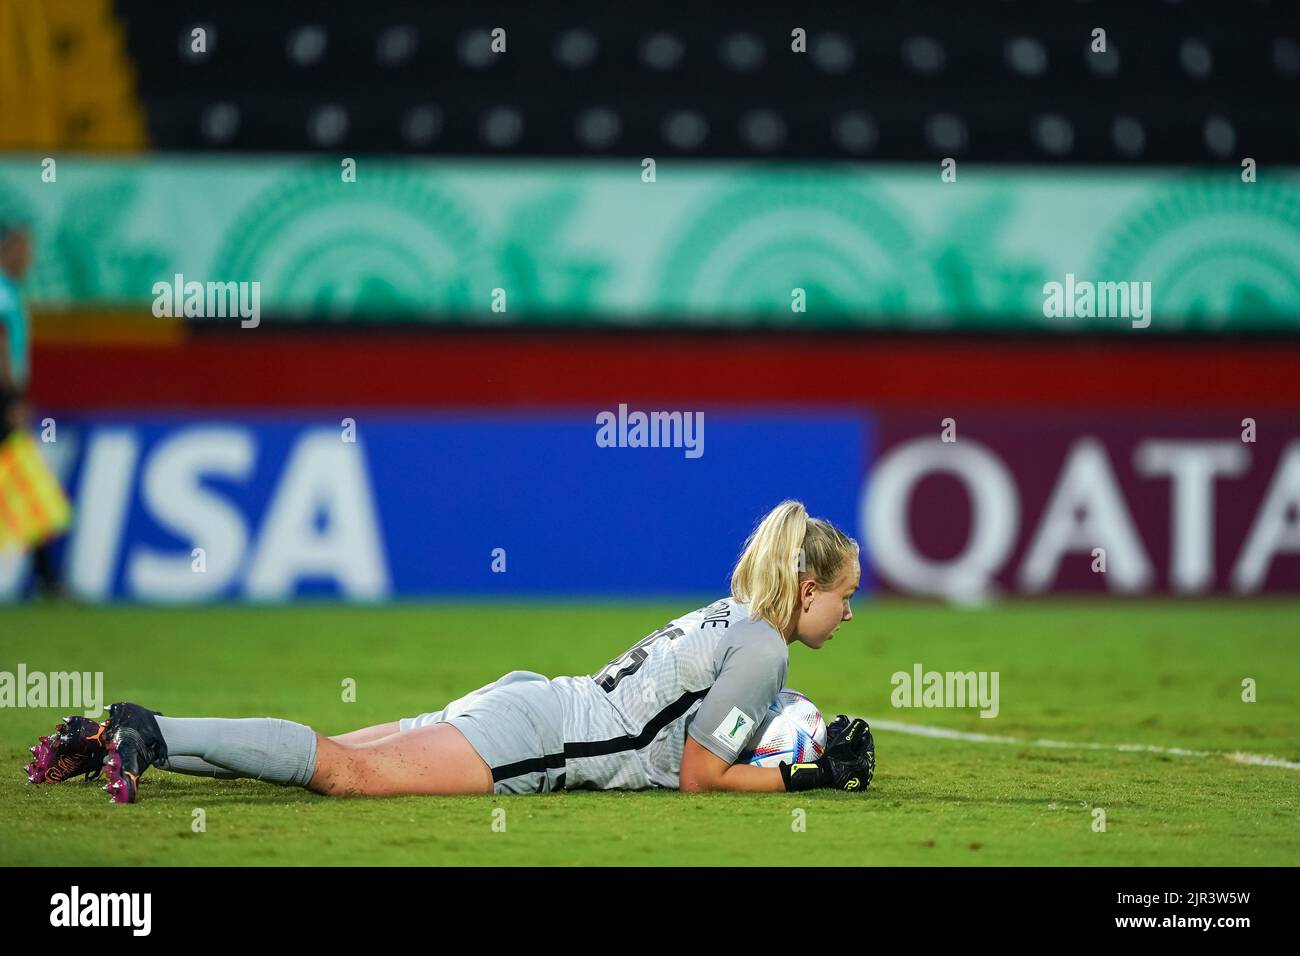 Alajuela, Costa Rica. 21st Aug, 2022. Alajuela, Costa Rica, August 21st 2022: Goalkeeper Lisan Alkemade (16 Netherlands) makes a save during the FIFA U20 Womens World Cup Costa Rica 2022 quarterfinal football match between Nigeria and Netherlands at Morera Soto in Alajuela, Costa Rica. (Daniela Porcelli/SPP) Credit: SPP Sport Press Photo. /Alamy Live News Stock Photo